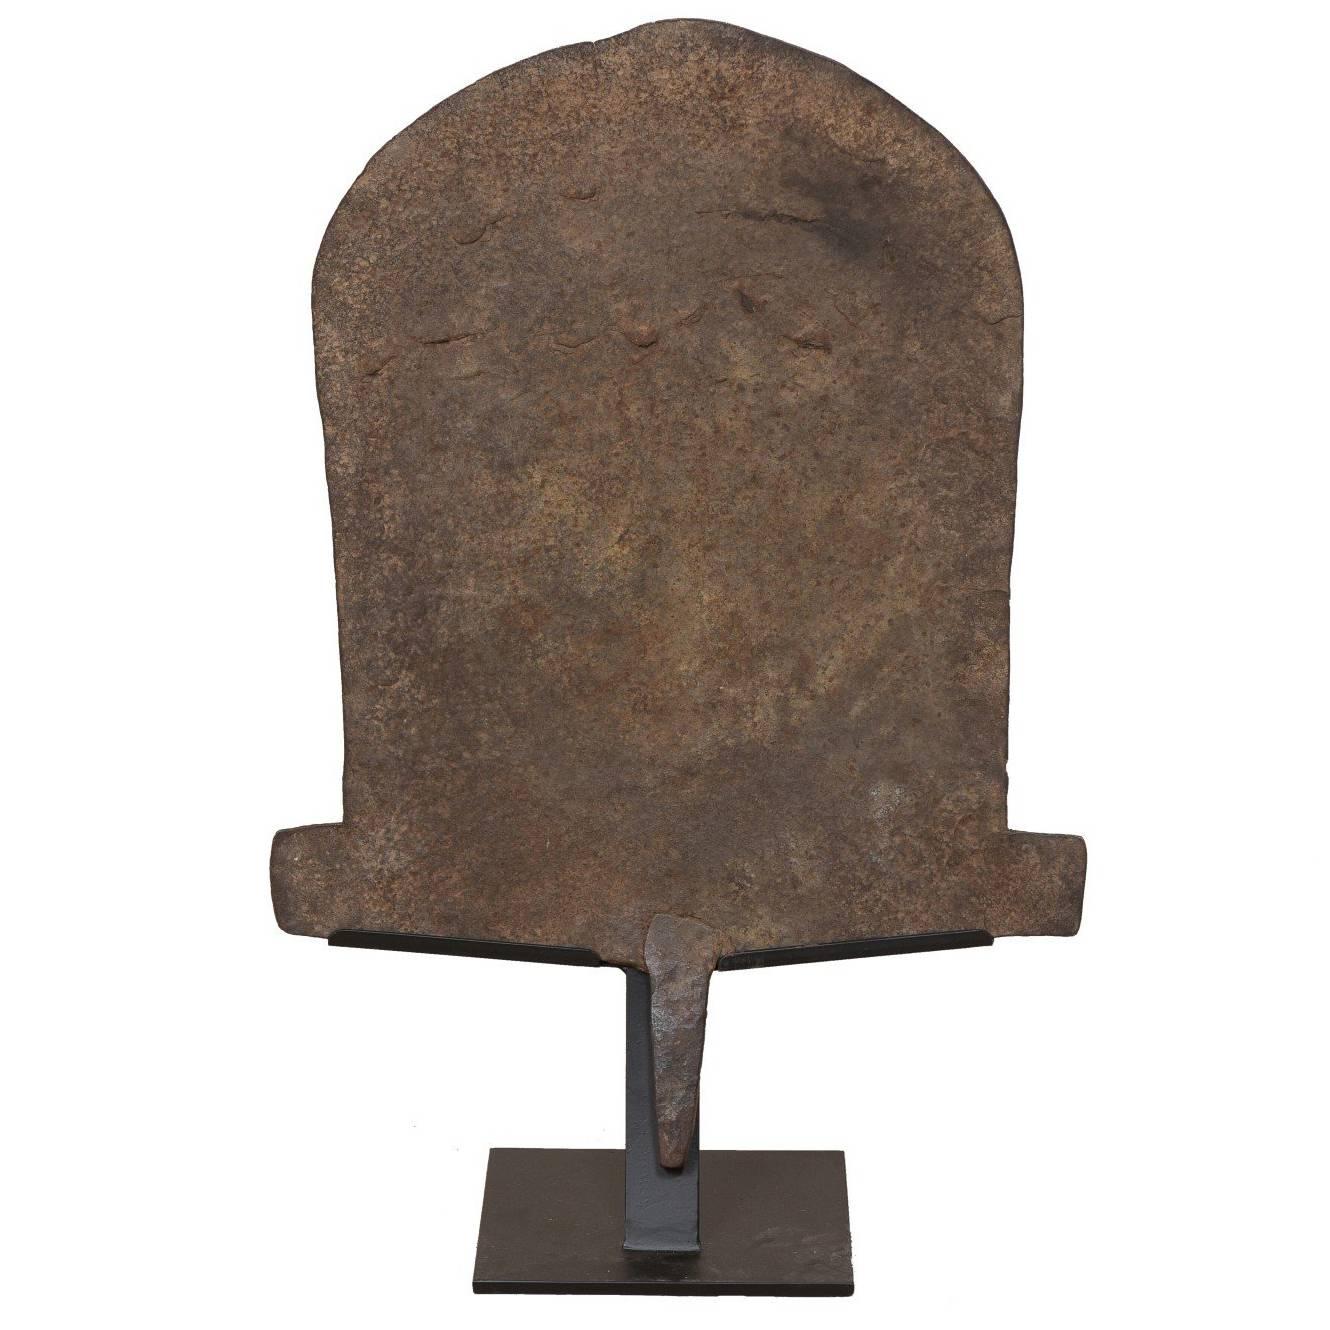 Large Forged Iron Currency from Nigeria, West Africa on Custom Stand